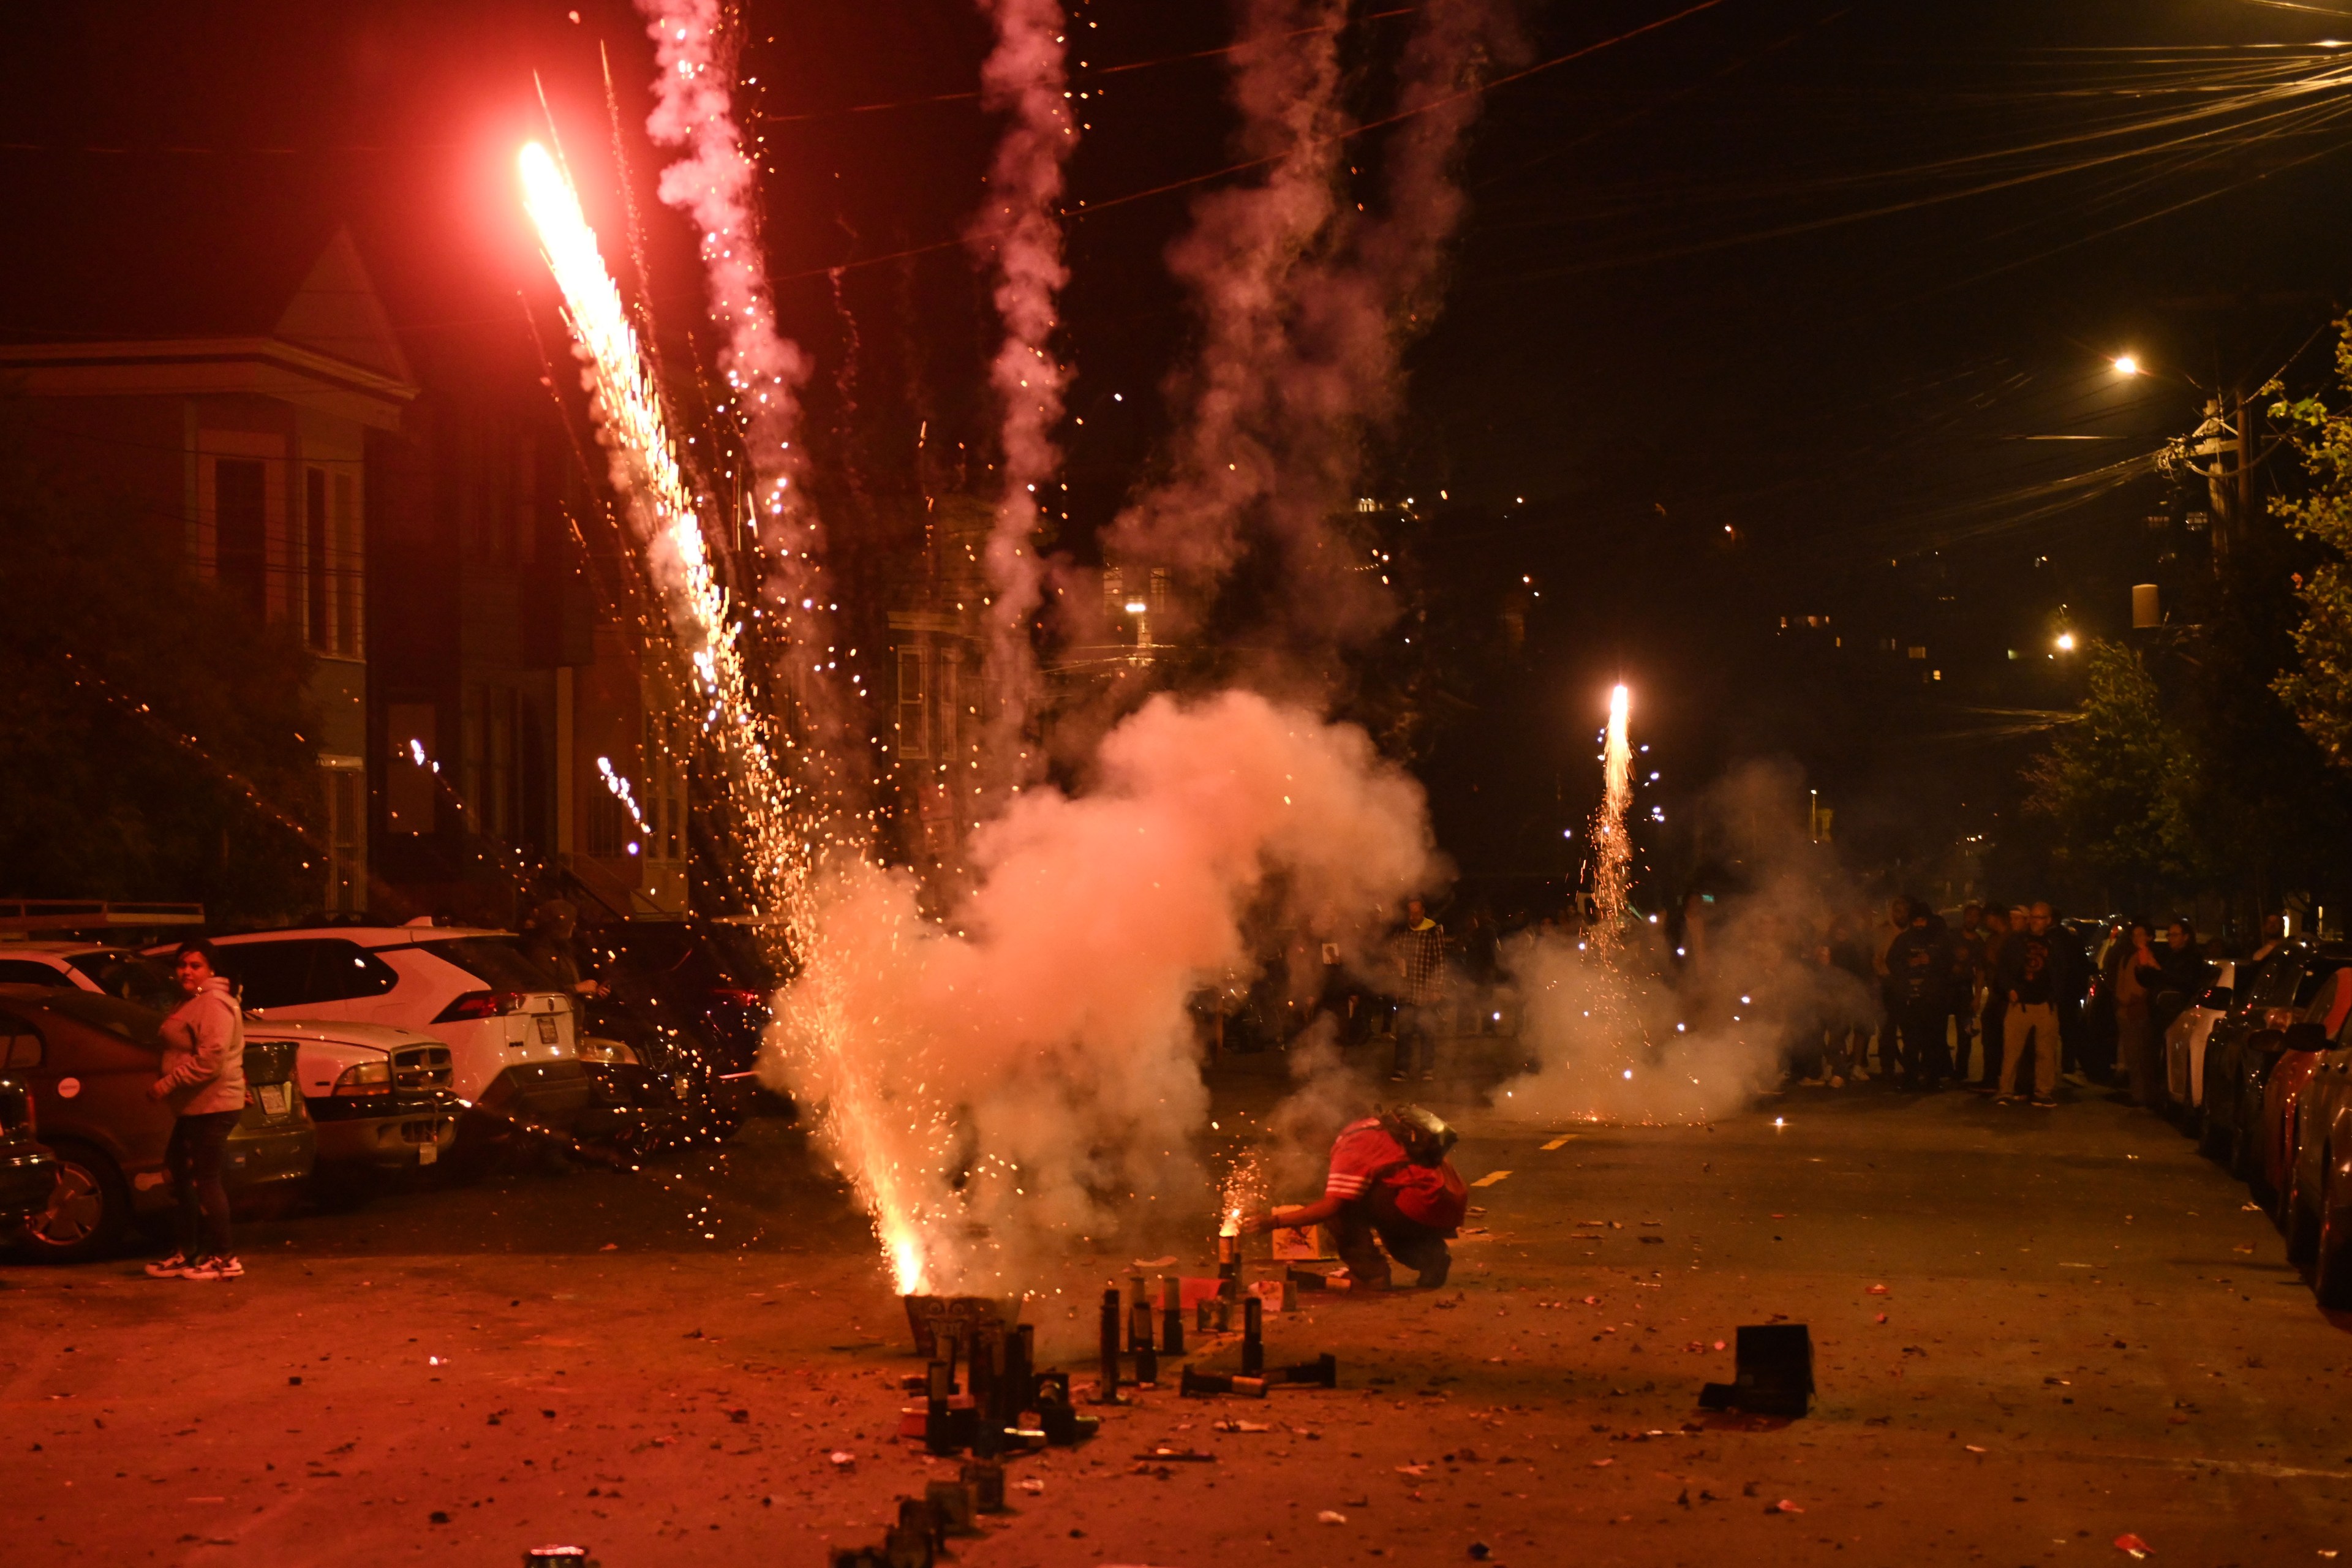 At night on a street, fireworks are being launched, with sparks and smoke filling the scene. People are gathered on either side, some watching or tending to the fireworks.